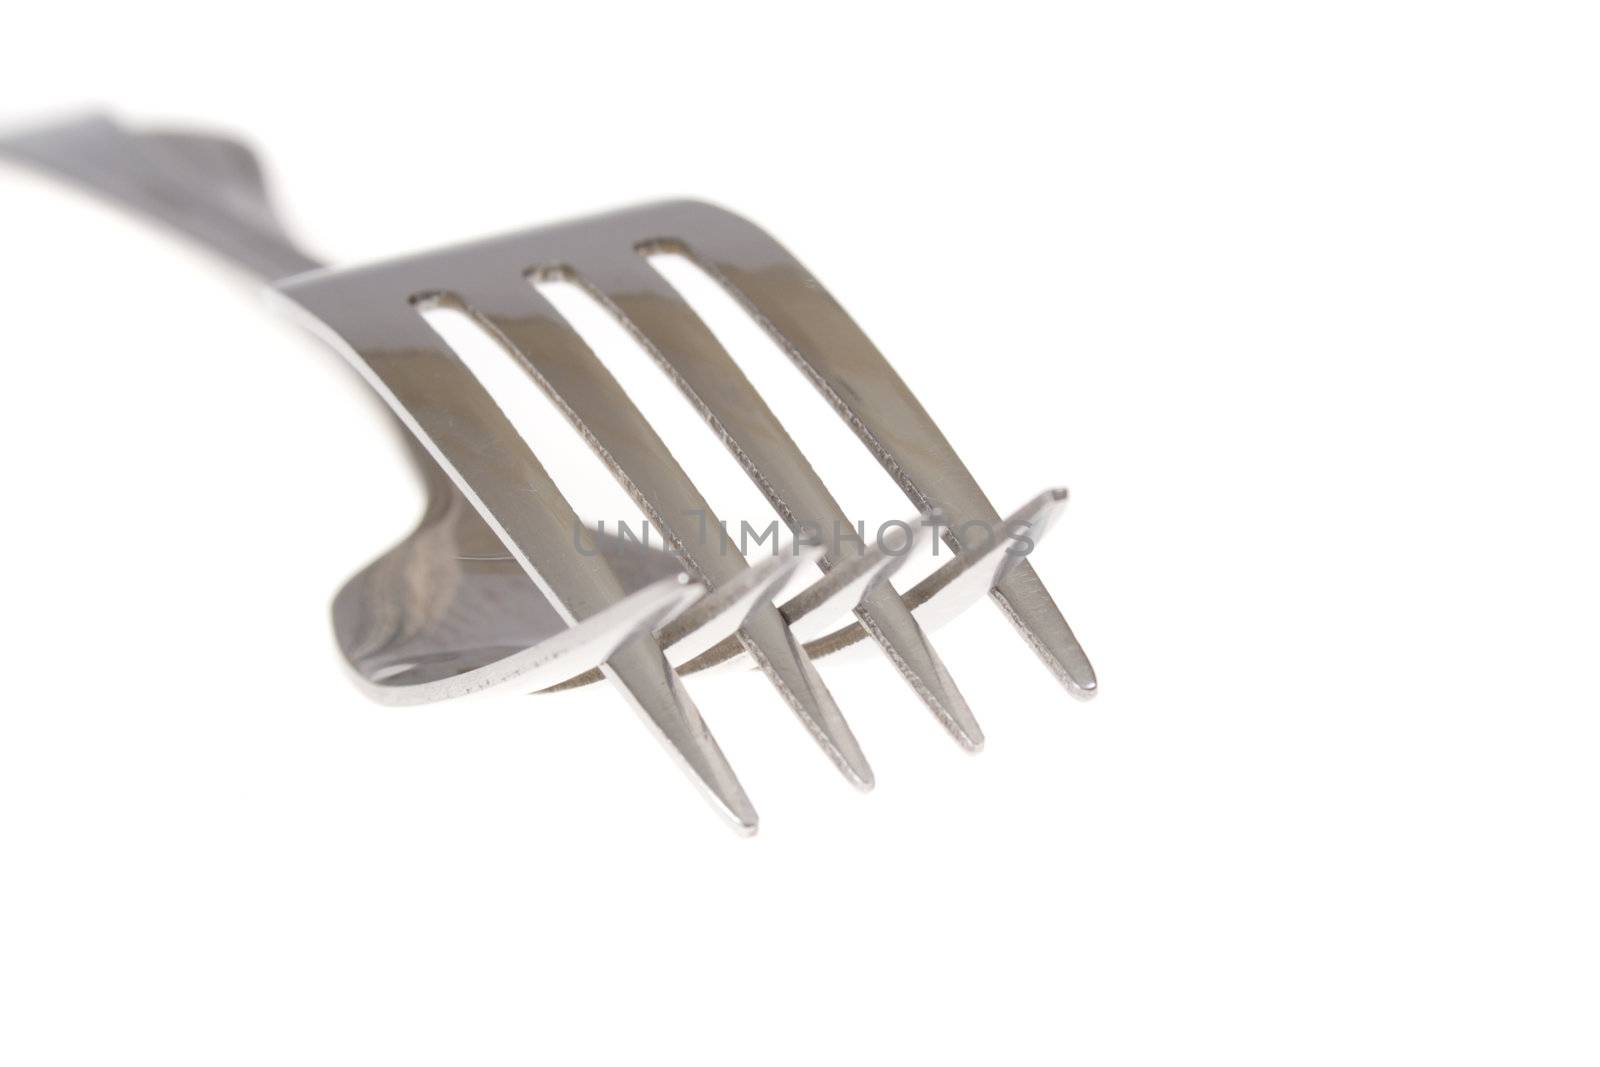 two forks photo on the white background